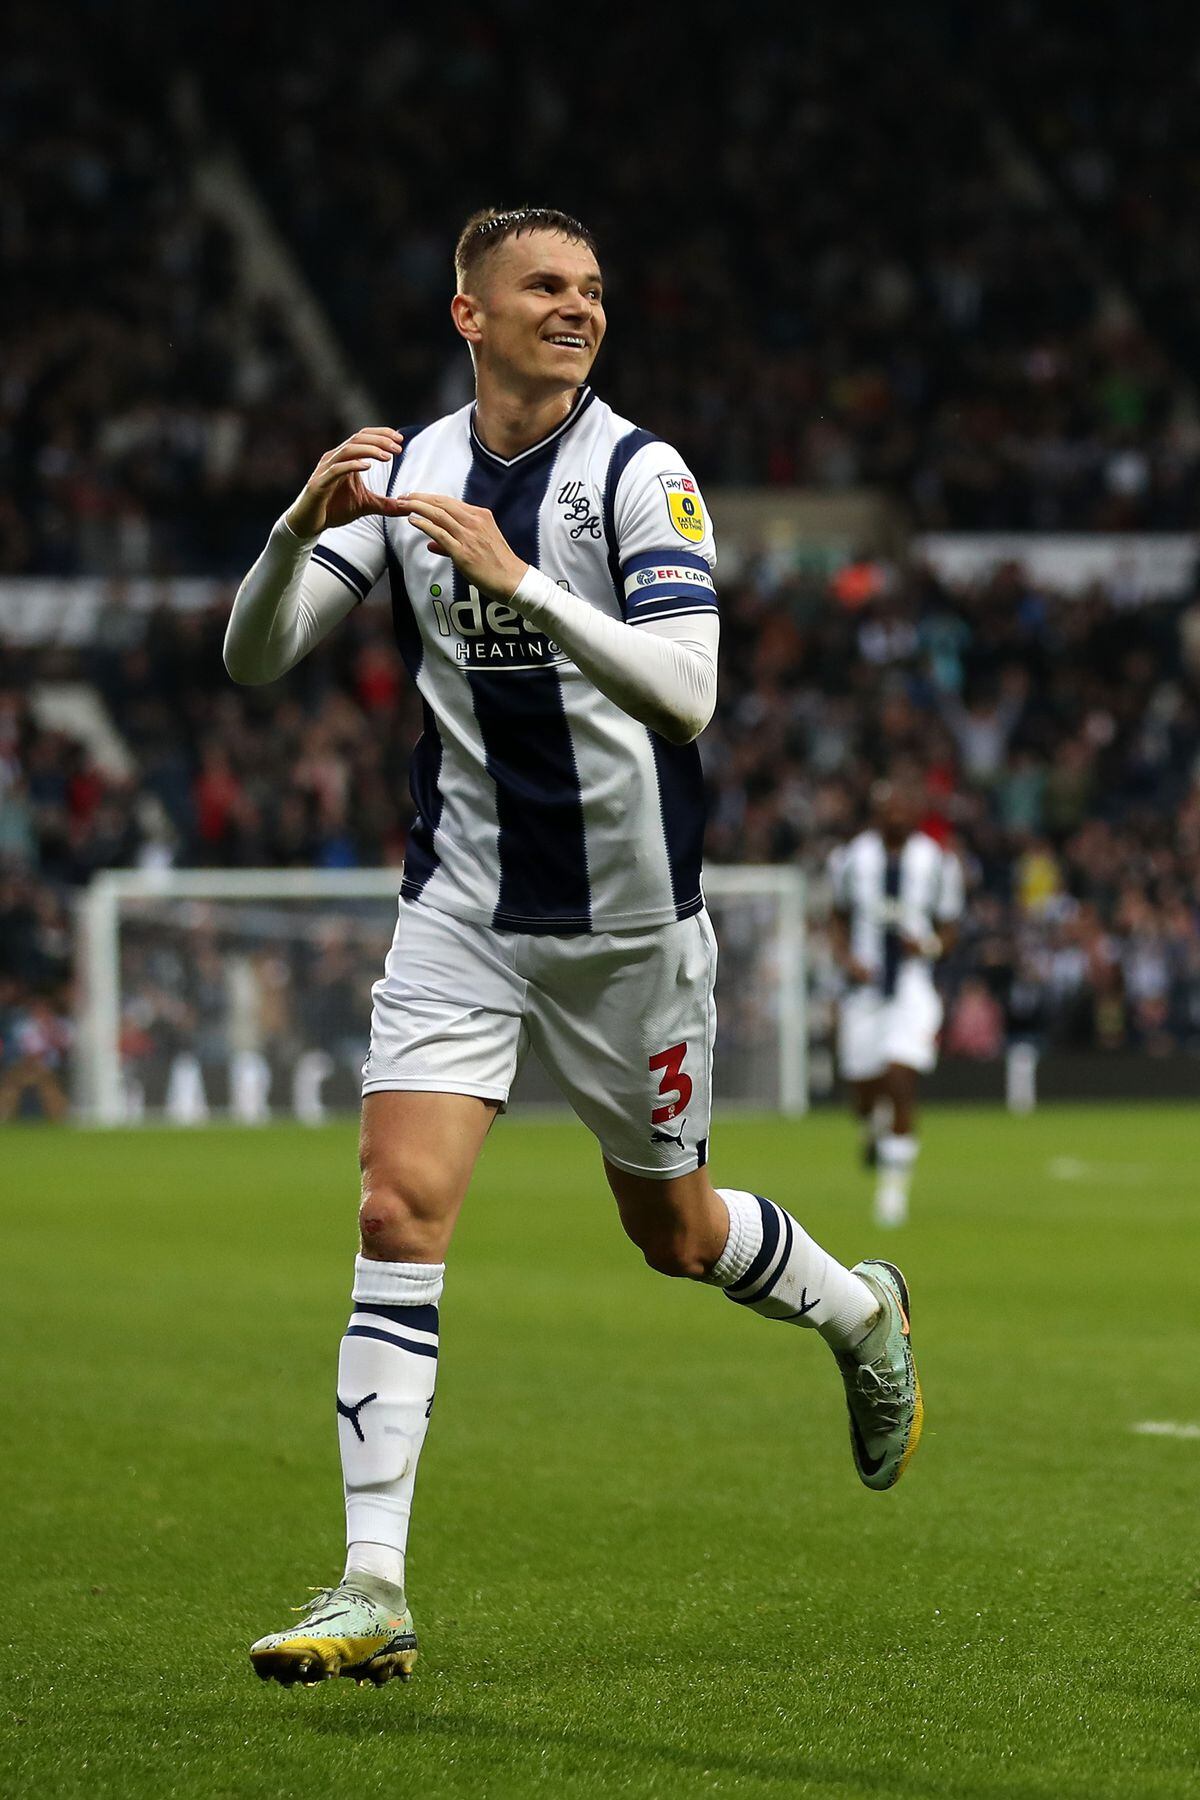 Conor Townsend of West Bromwich Albion celebrates after scoring a goal to make it 1-1 (Photo by Adam Fradgley/West Bromwich Albion FC via Getty Images).